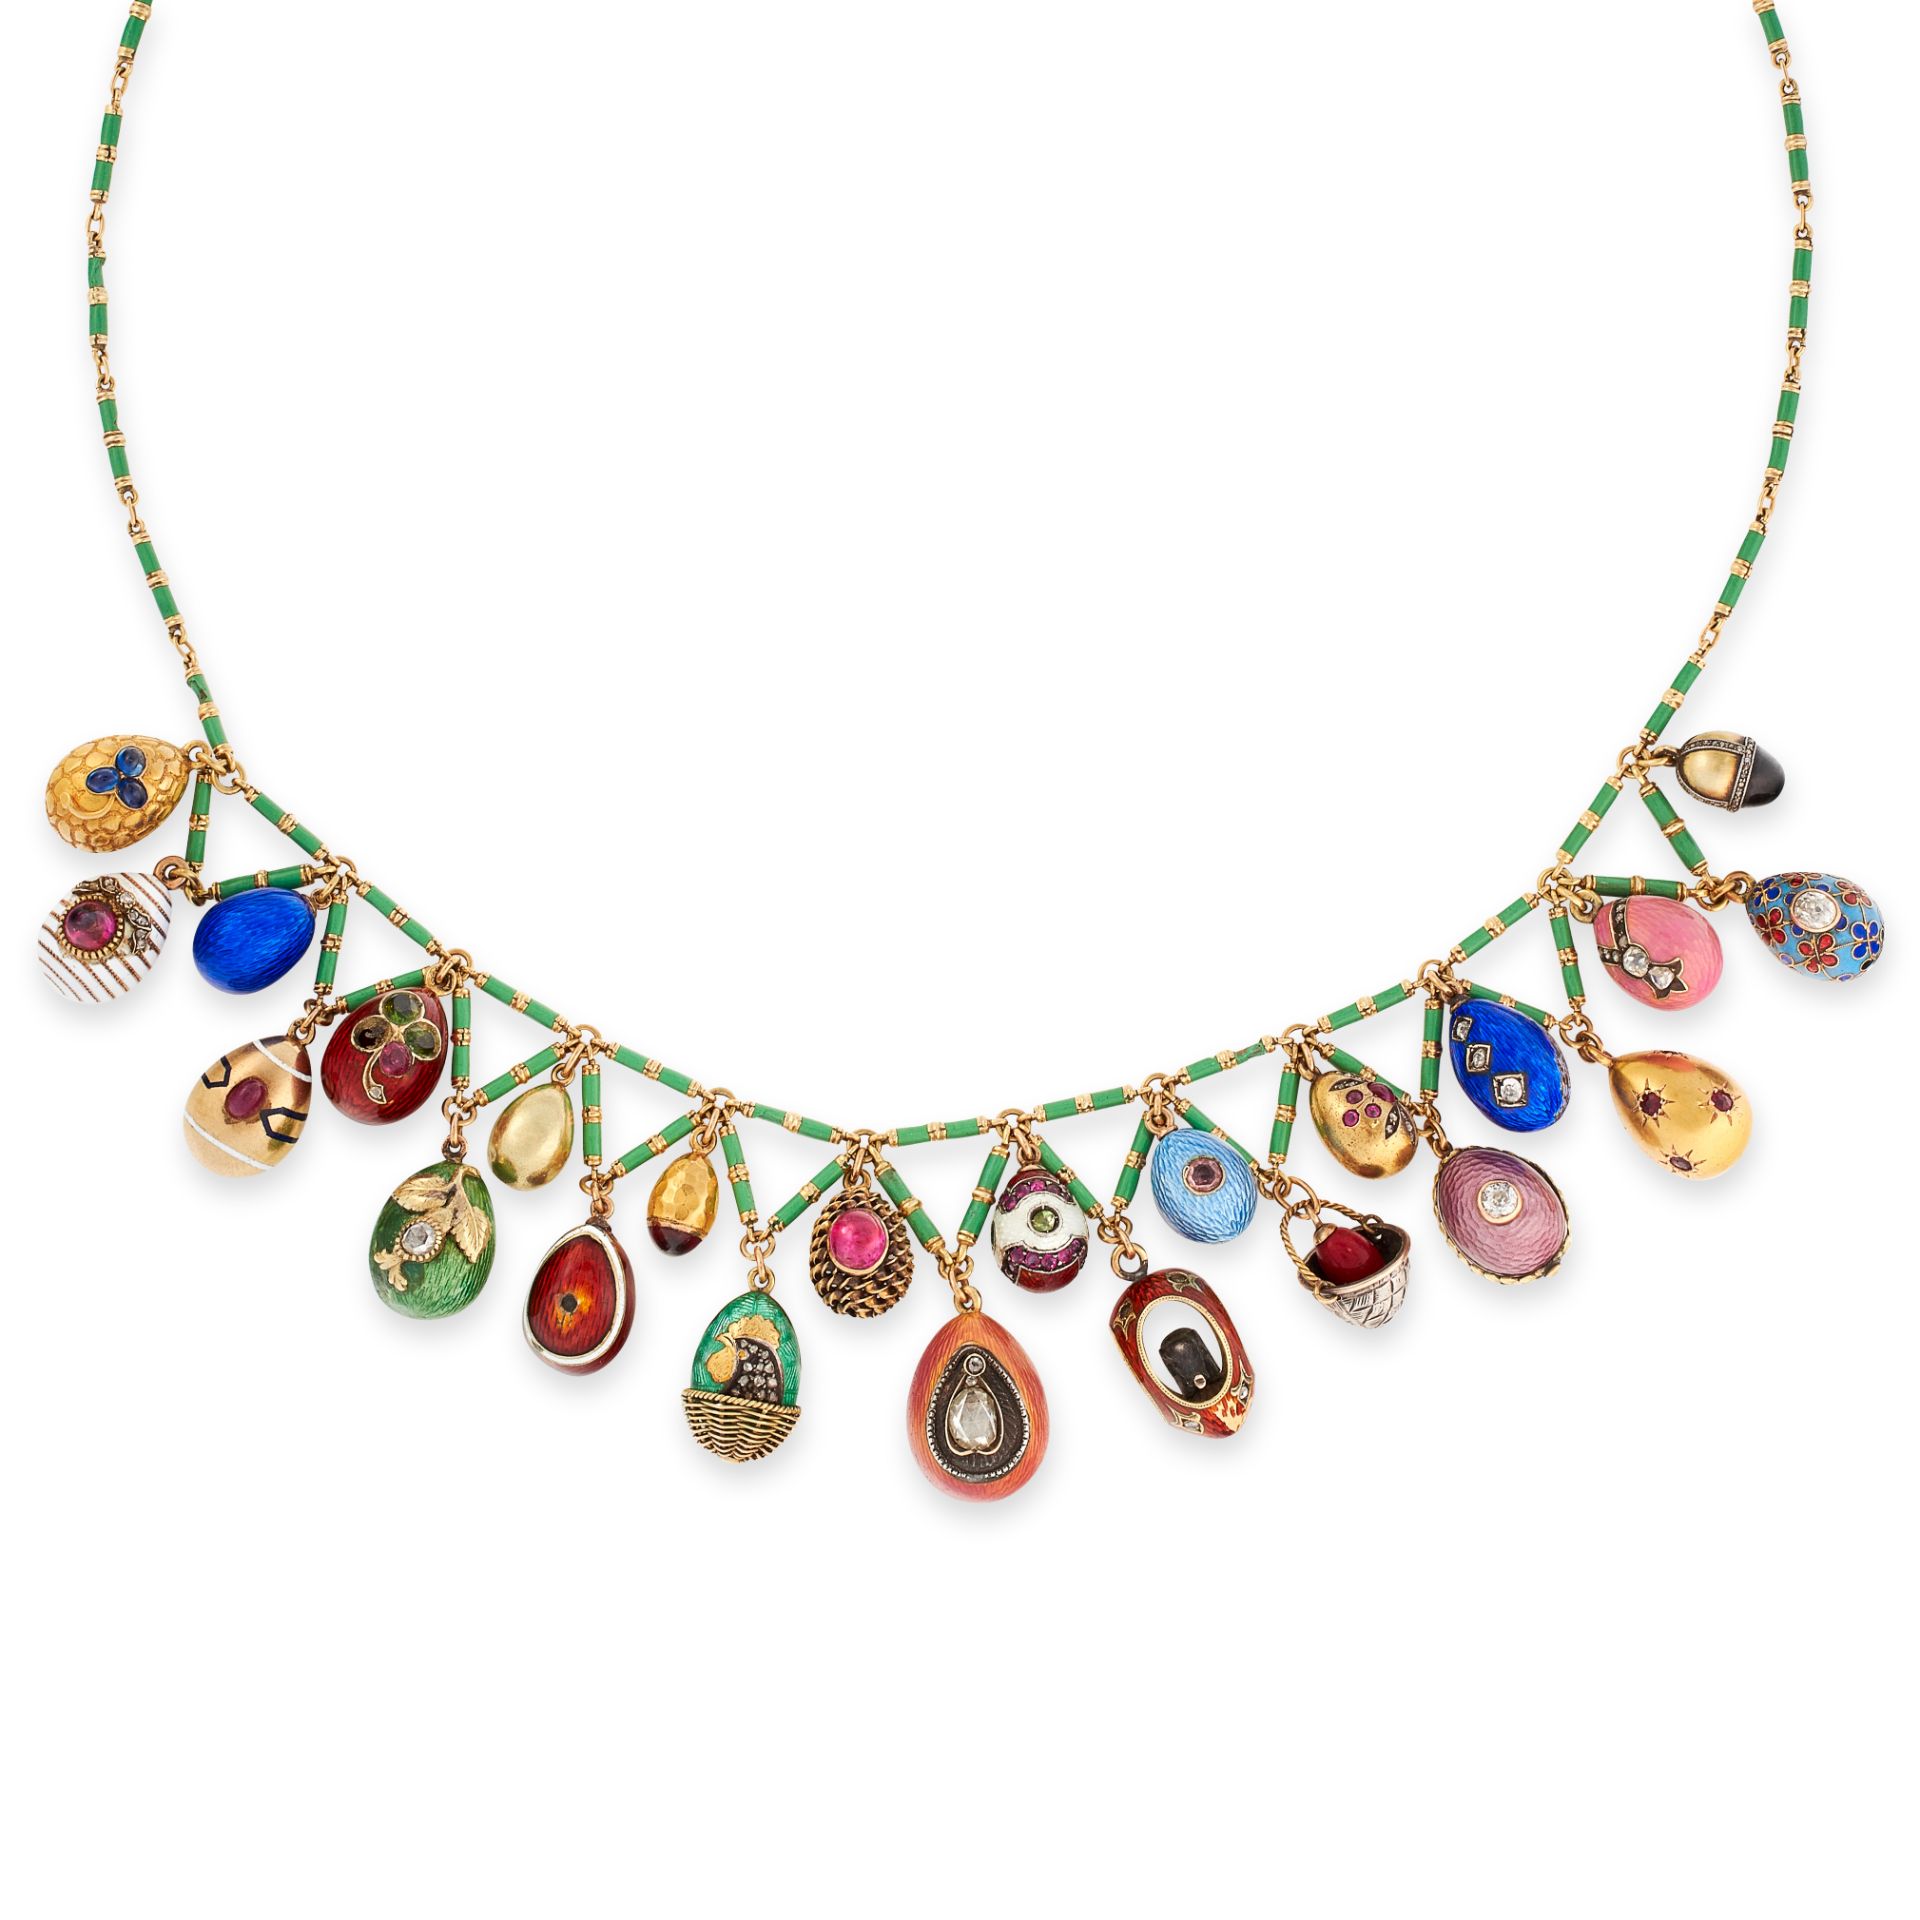 AN ANTIQUE IMPERIAL RUSSIAN JEWELLED ENAMEL EASTER EGG NECKLACE, PROBABLY FABERGE CIRCA 1900 in